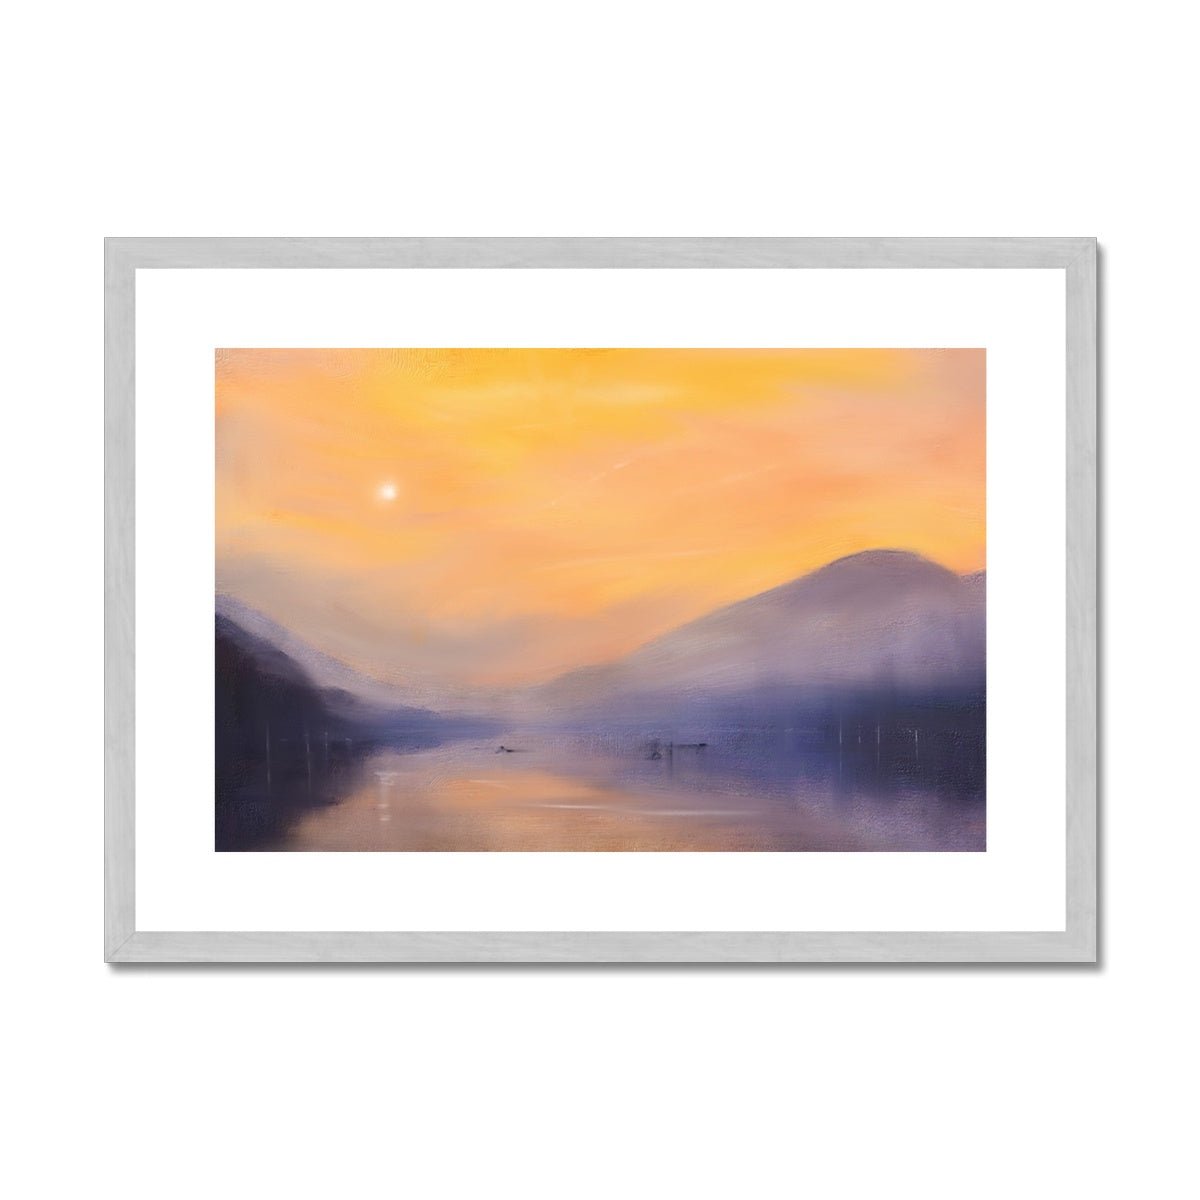 Loch Eck Dusk Painting | Antique Framed & Mounted Prints From Scotland-Antique Framed & Mounted Prints-Scottish Lochs & Mountains Art Gallery-A2 Landscape-Silver Frame-Paintings, Prints, Homeware, Art Gifts From Scotland By Scottish Artist Kevin Hunter